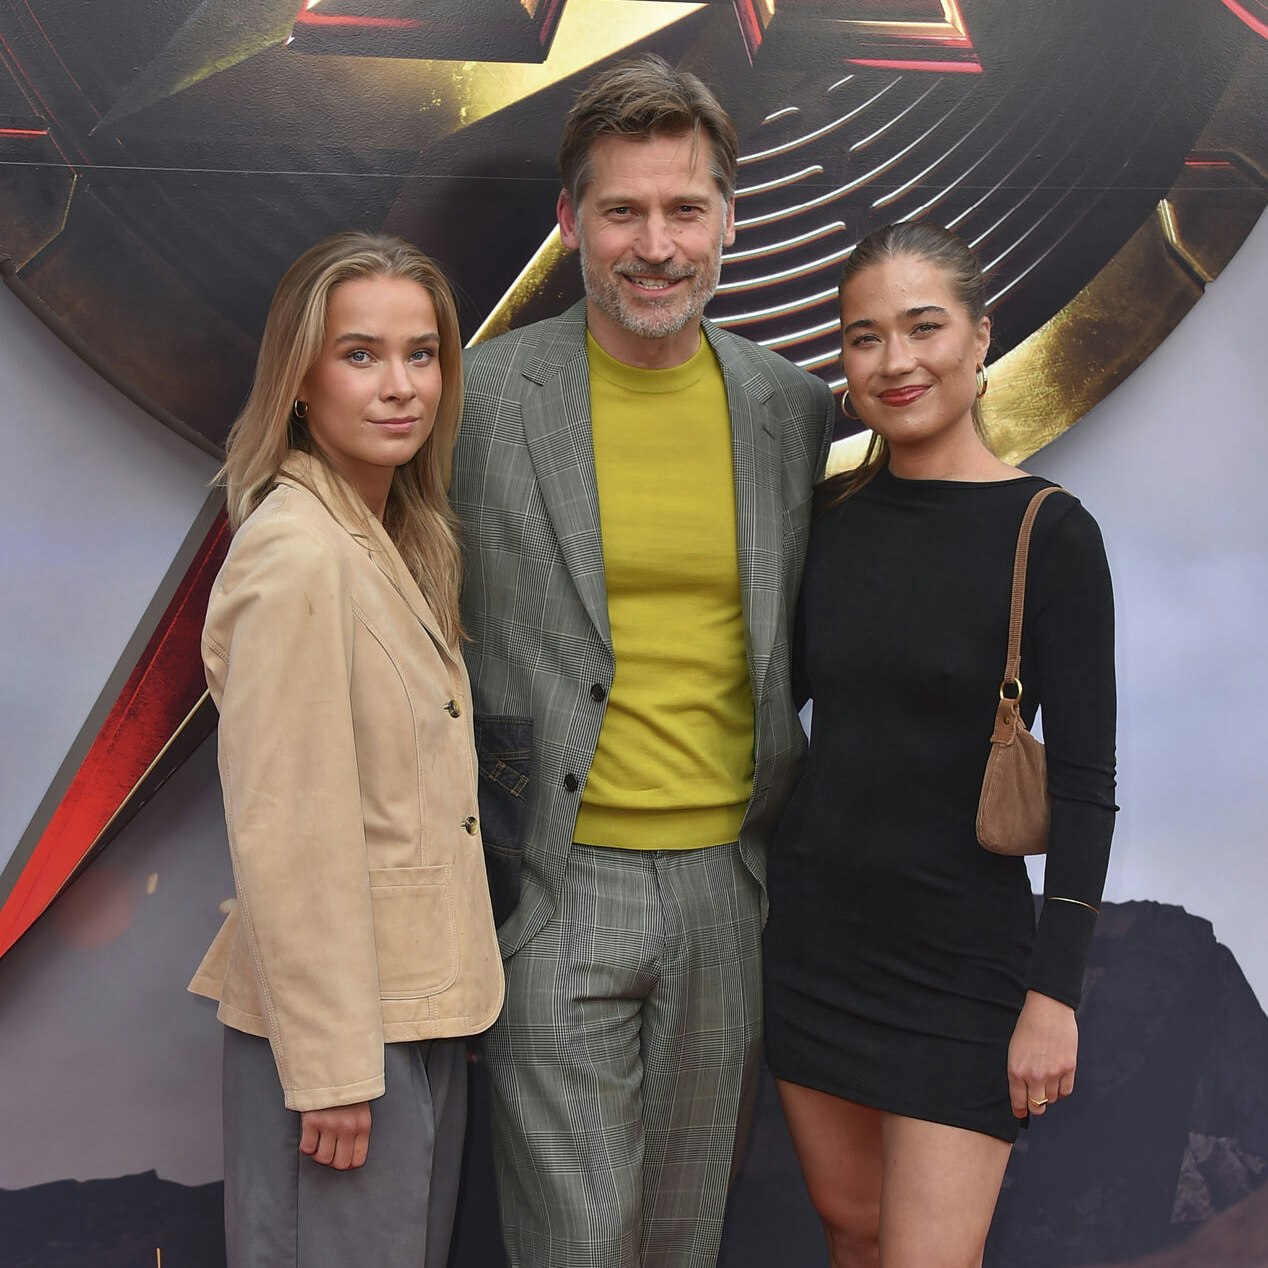 Safina Waldau, from left, Nikolaj Coster-Waldau, and Fillippa Coster-Waldau arrive at the premiere of "The Flash" on Monday, June 12, 2023, at Ovation Hollywood in Los Angeles. (Photo by Jordan Strauss/Invision/AP)